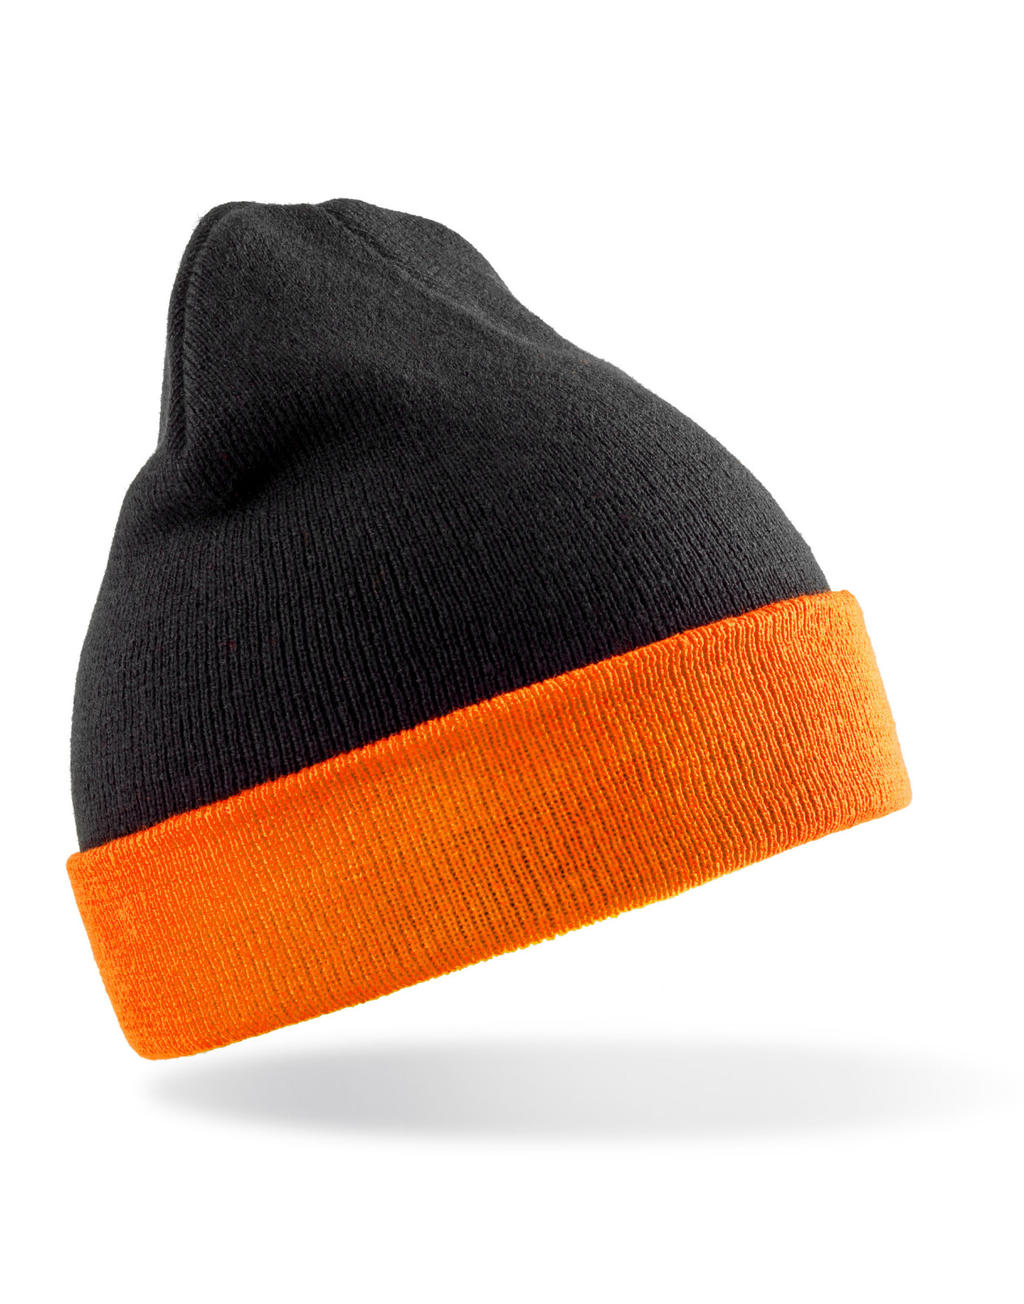  Recycled Black Compass Beanie in Farbe Black/Orange